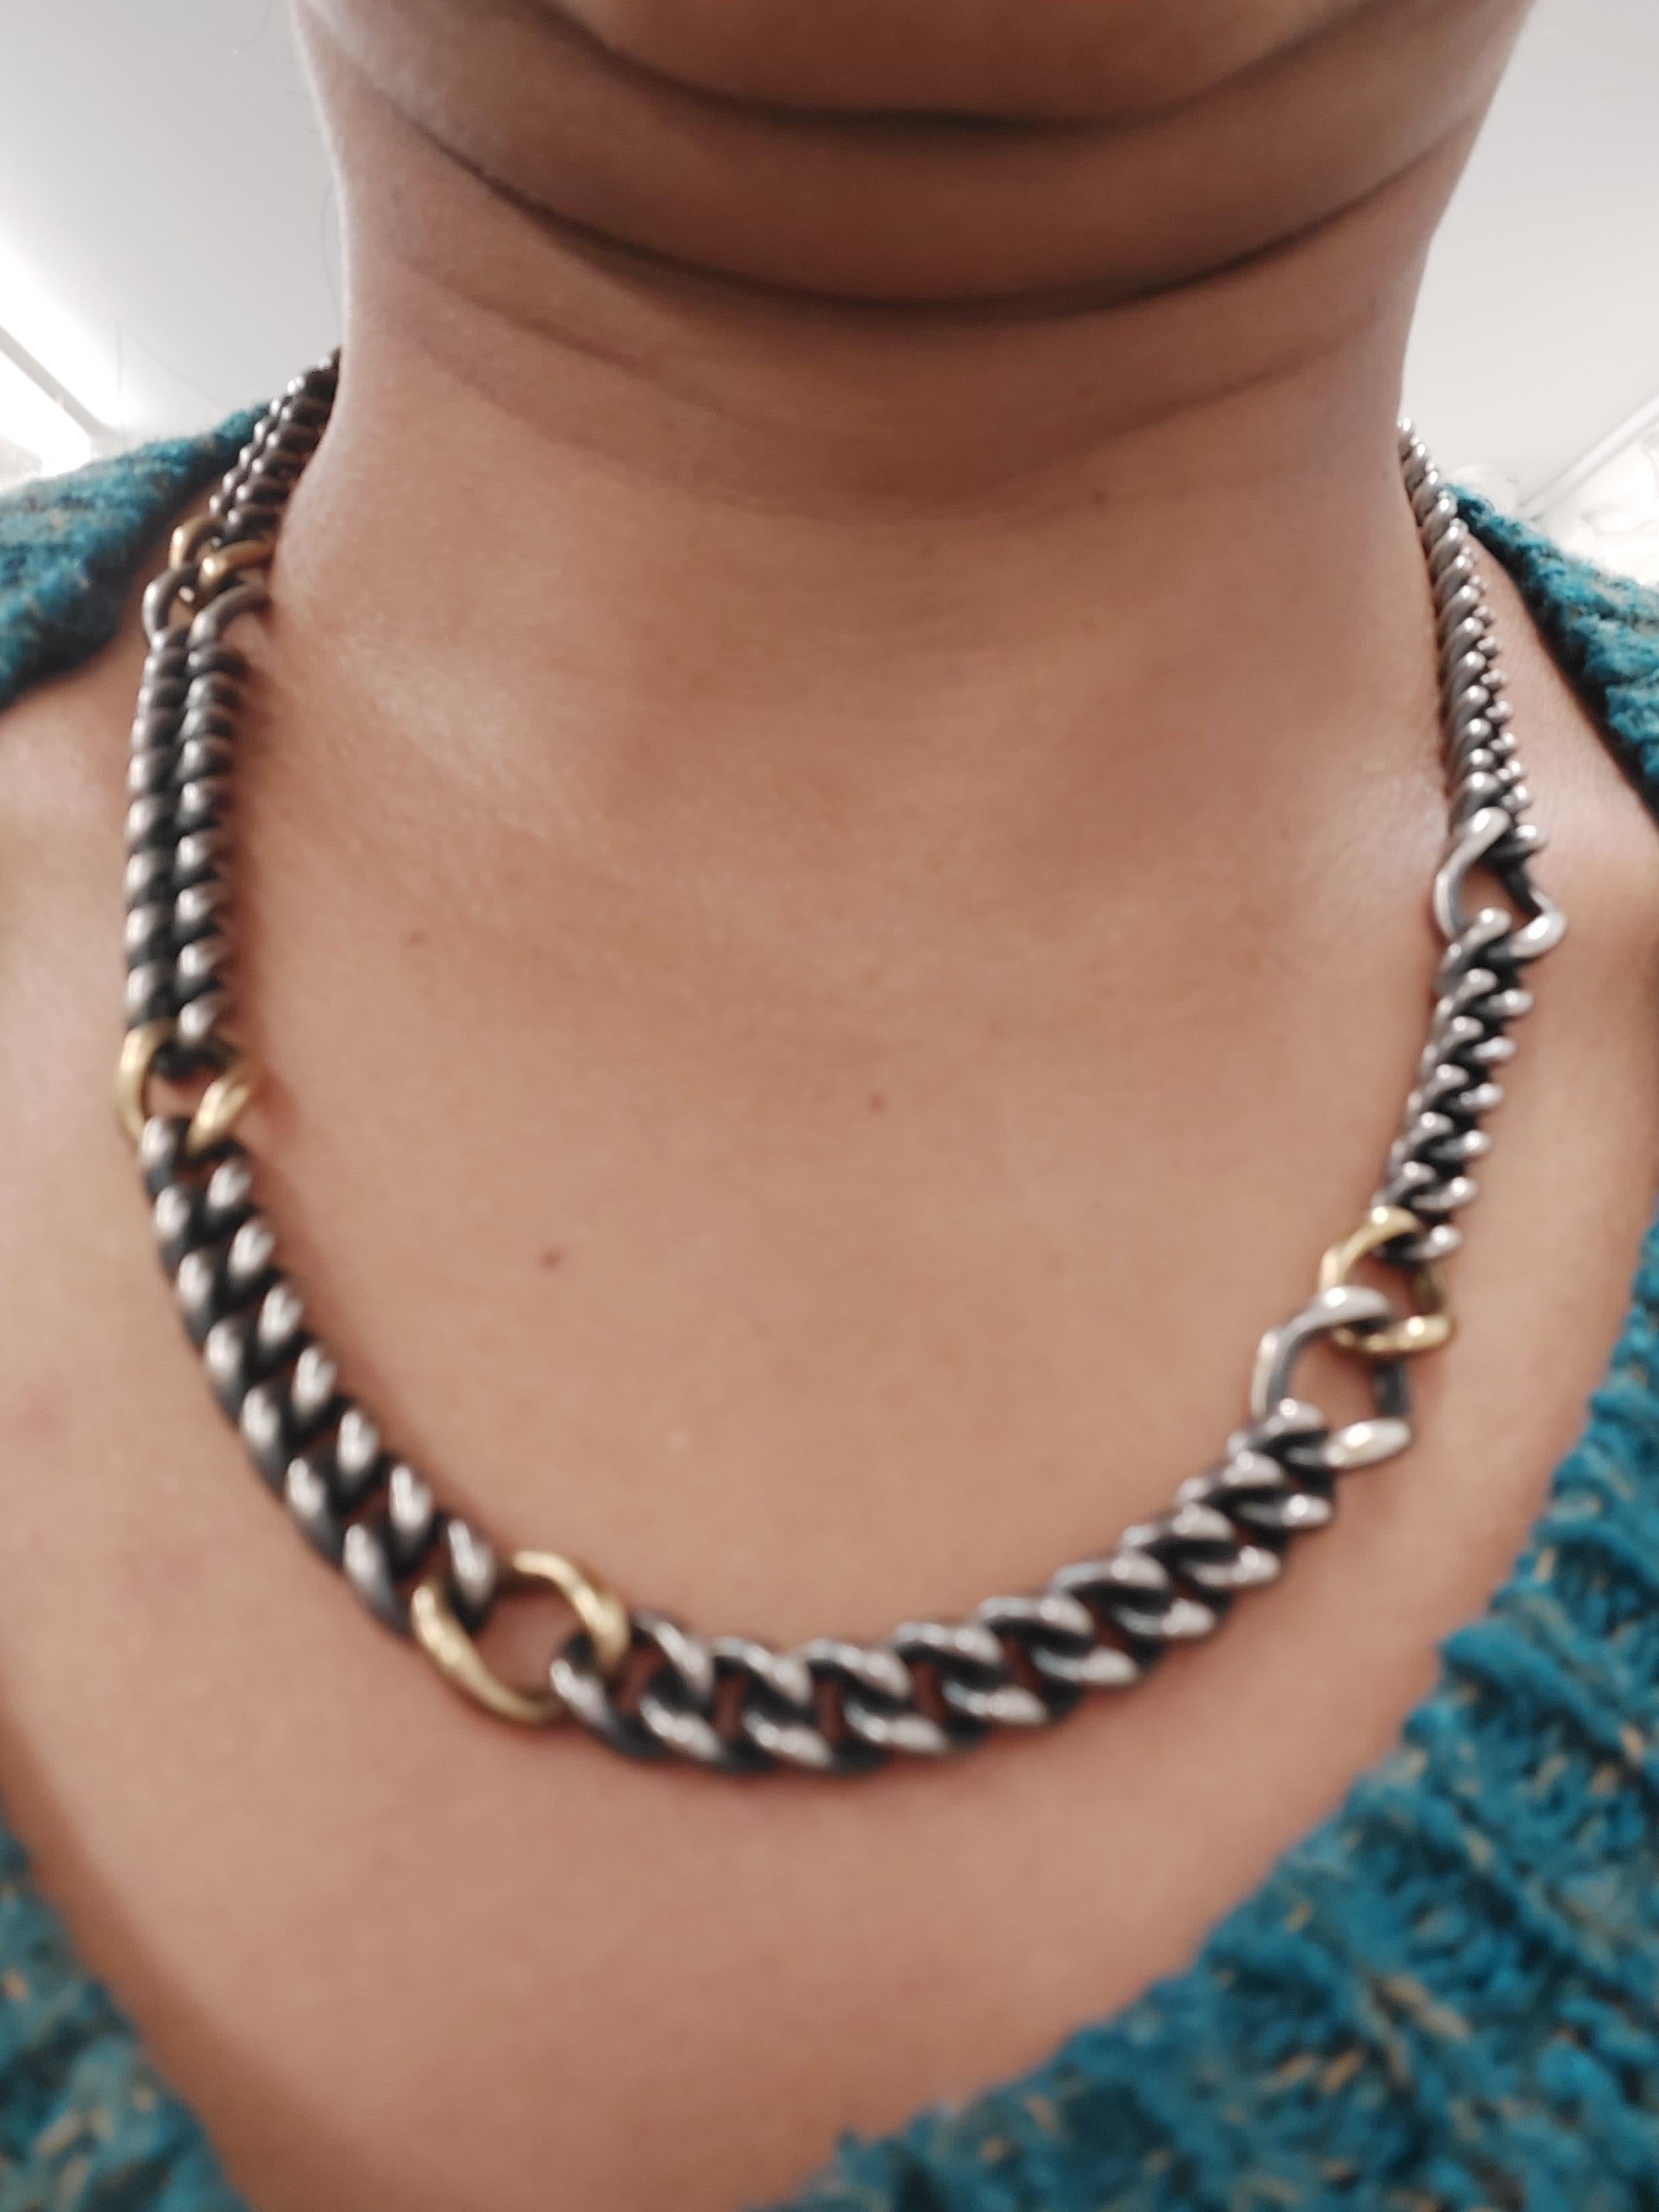 Hum 18ct Yellow Gold & Silver Curb Chain Necklace With Twist-Lock Closure In Excellent Condition For Sale In London, GB